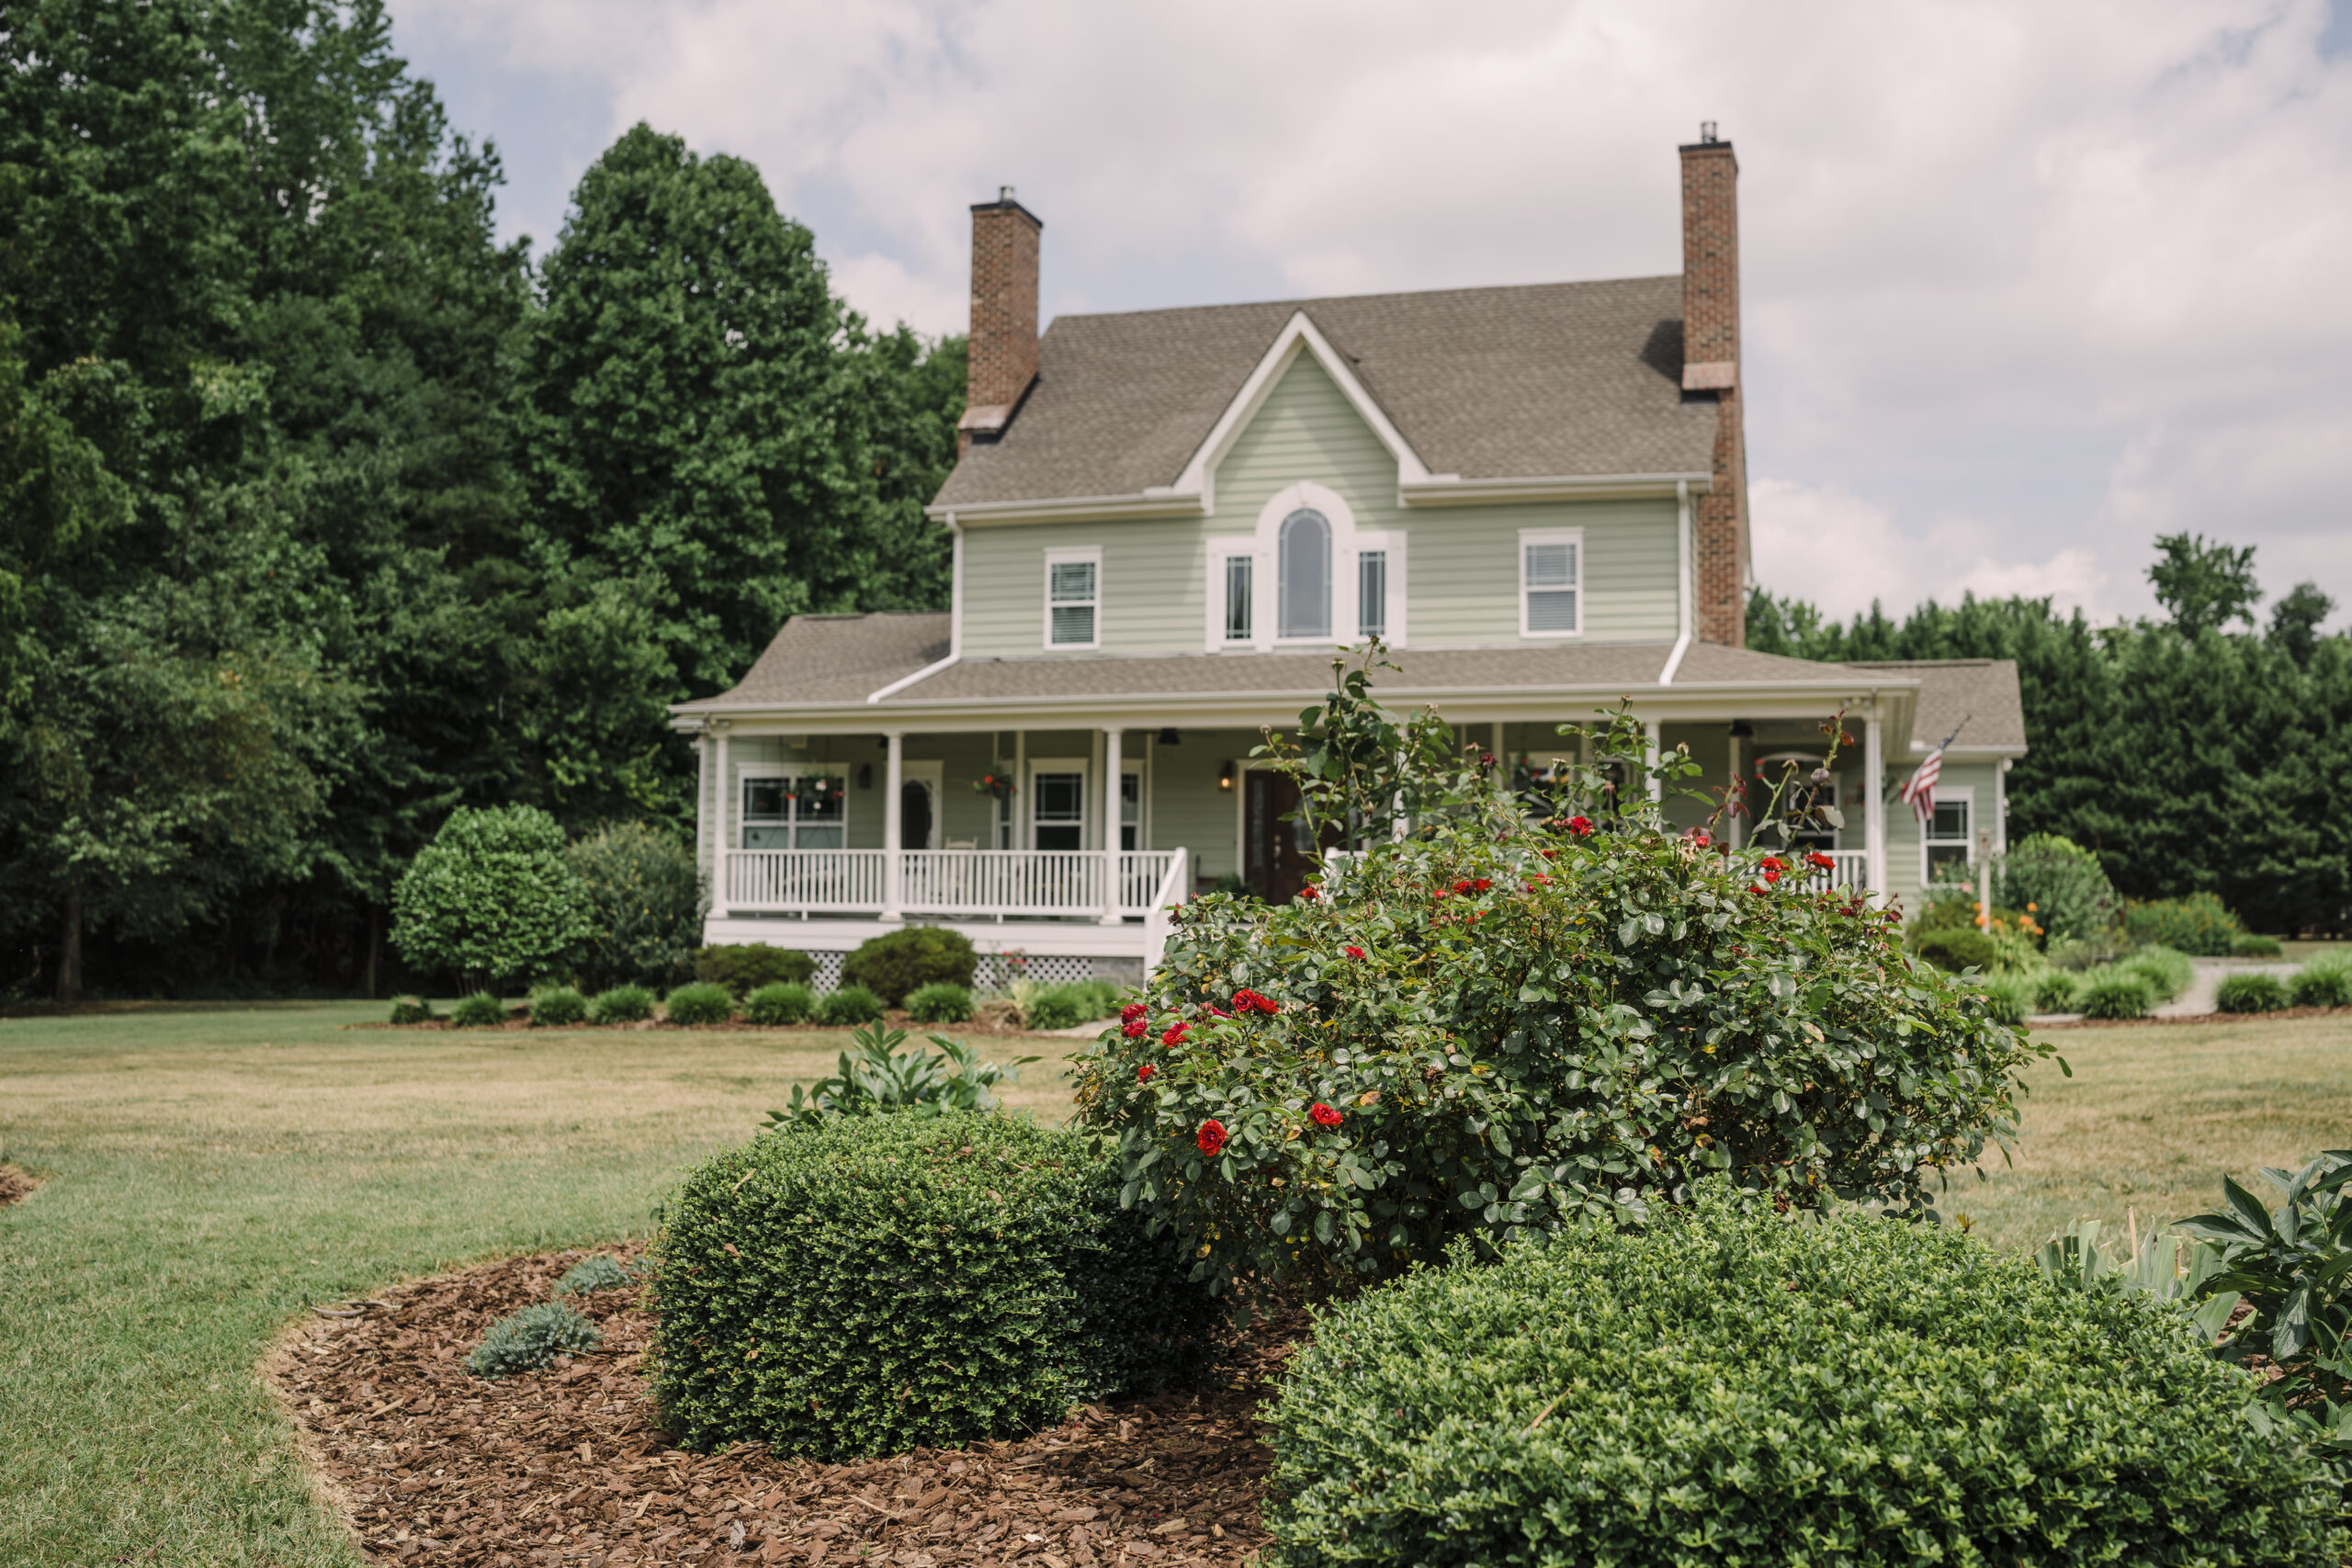 The Seven Oaks Bed & Breakfast, stands on the grounds in High Point, NC.